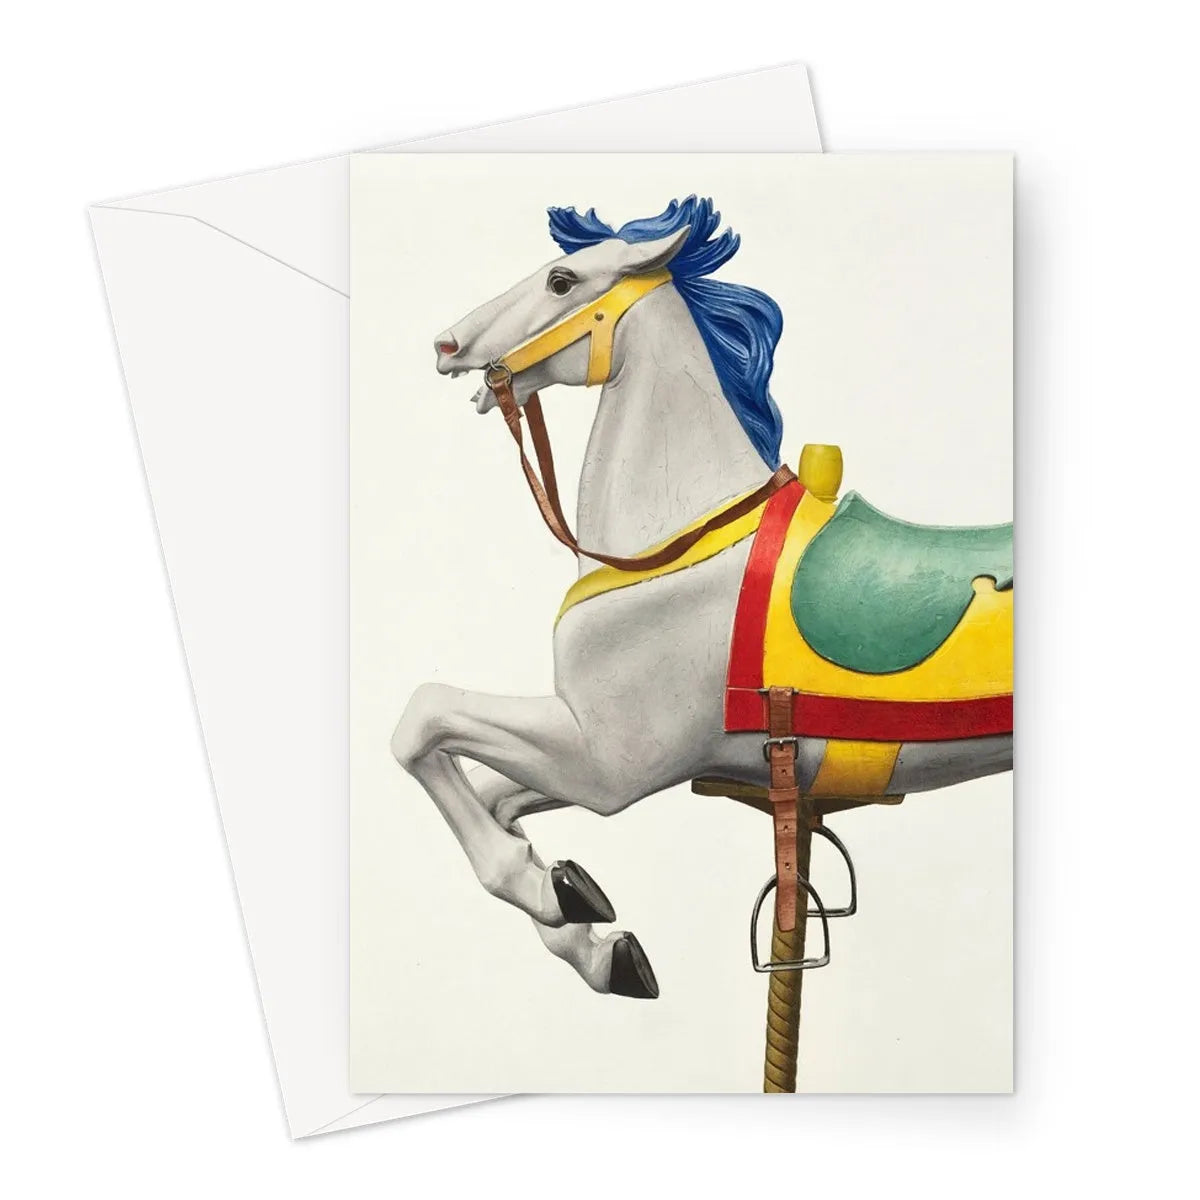 Carousel Horse Greeting Card - A5 Portrait / 1 Card - Greeting & Note Cards - Aesthetic Art